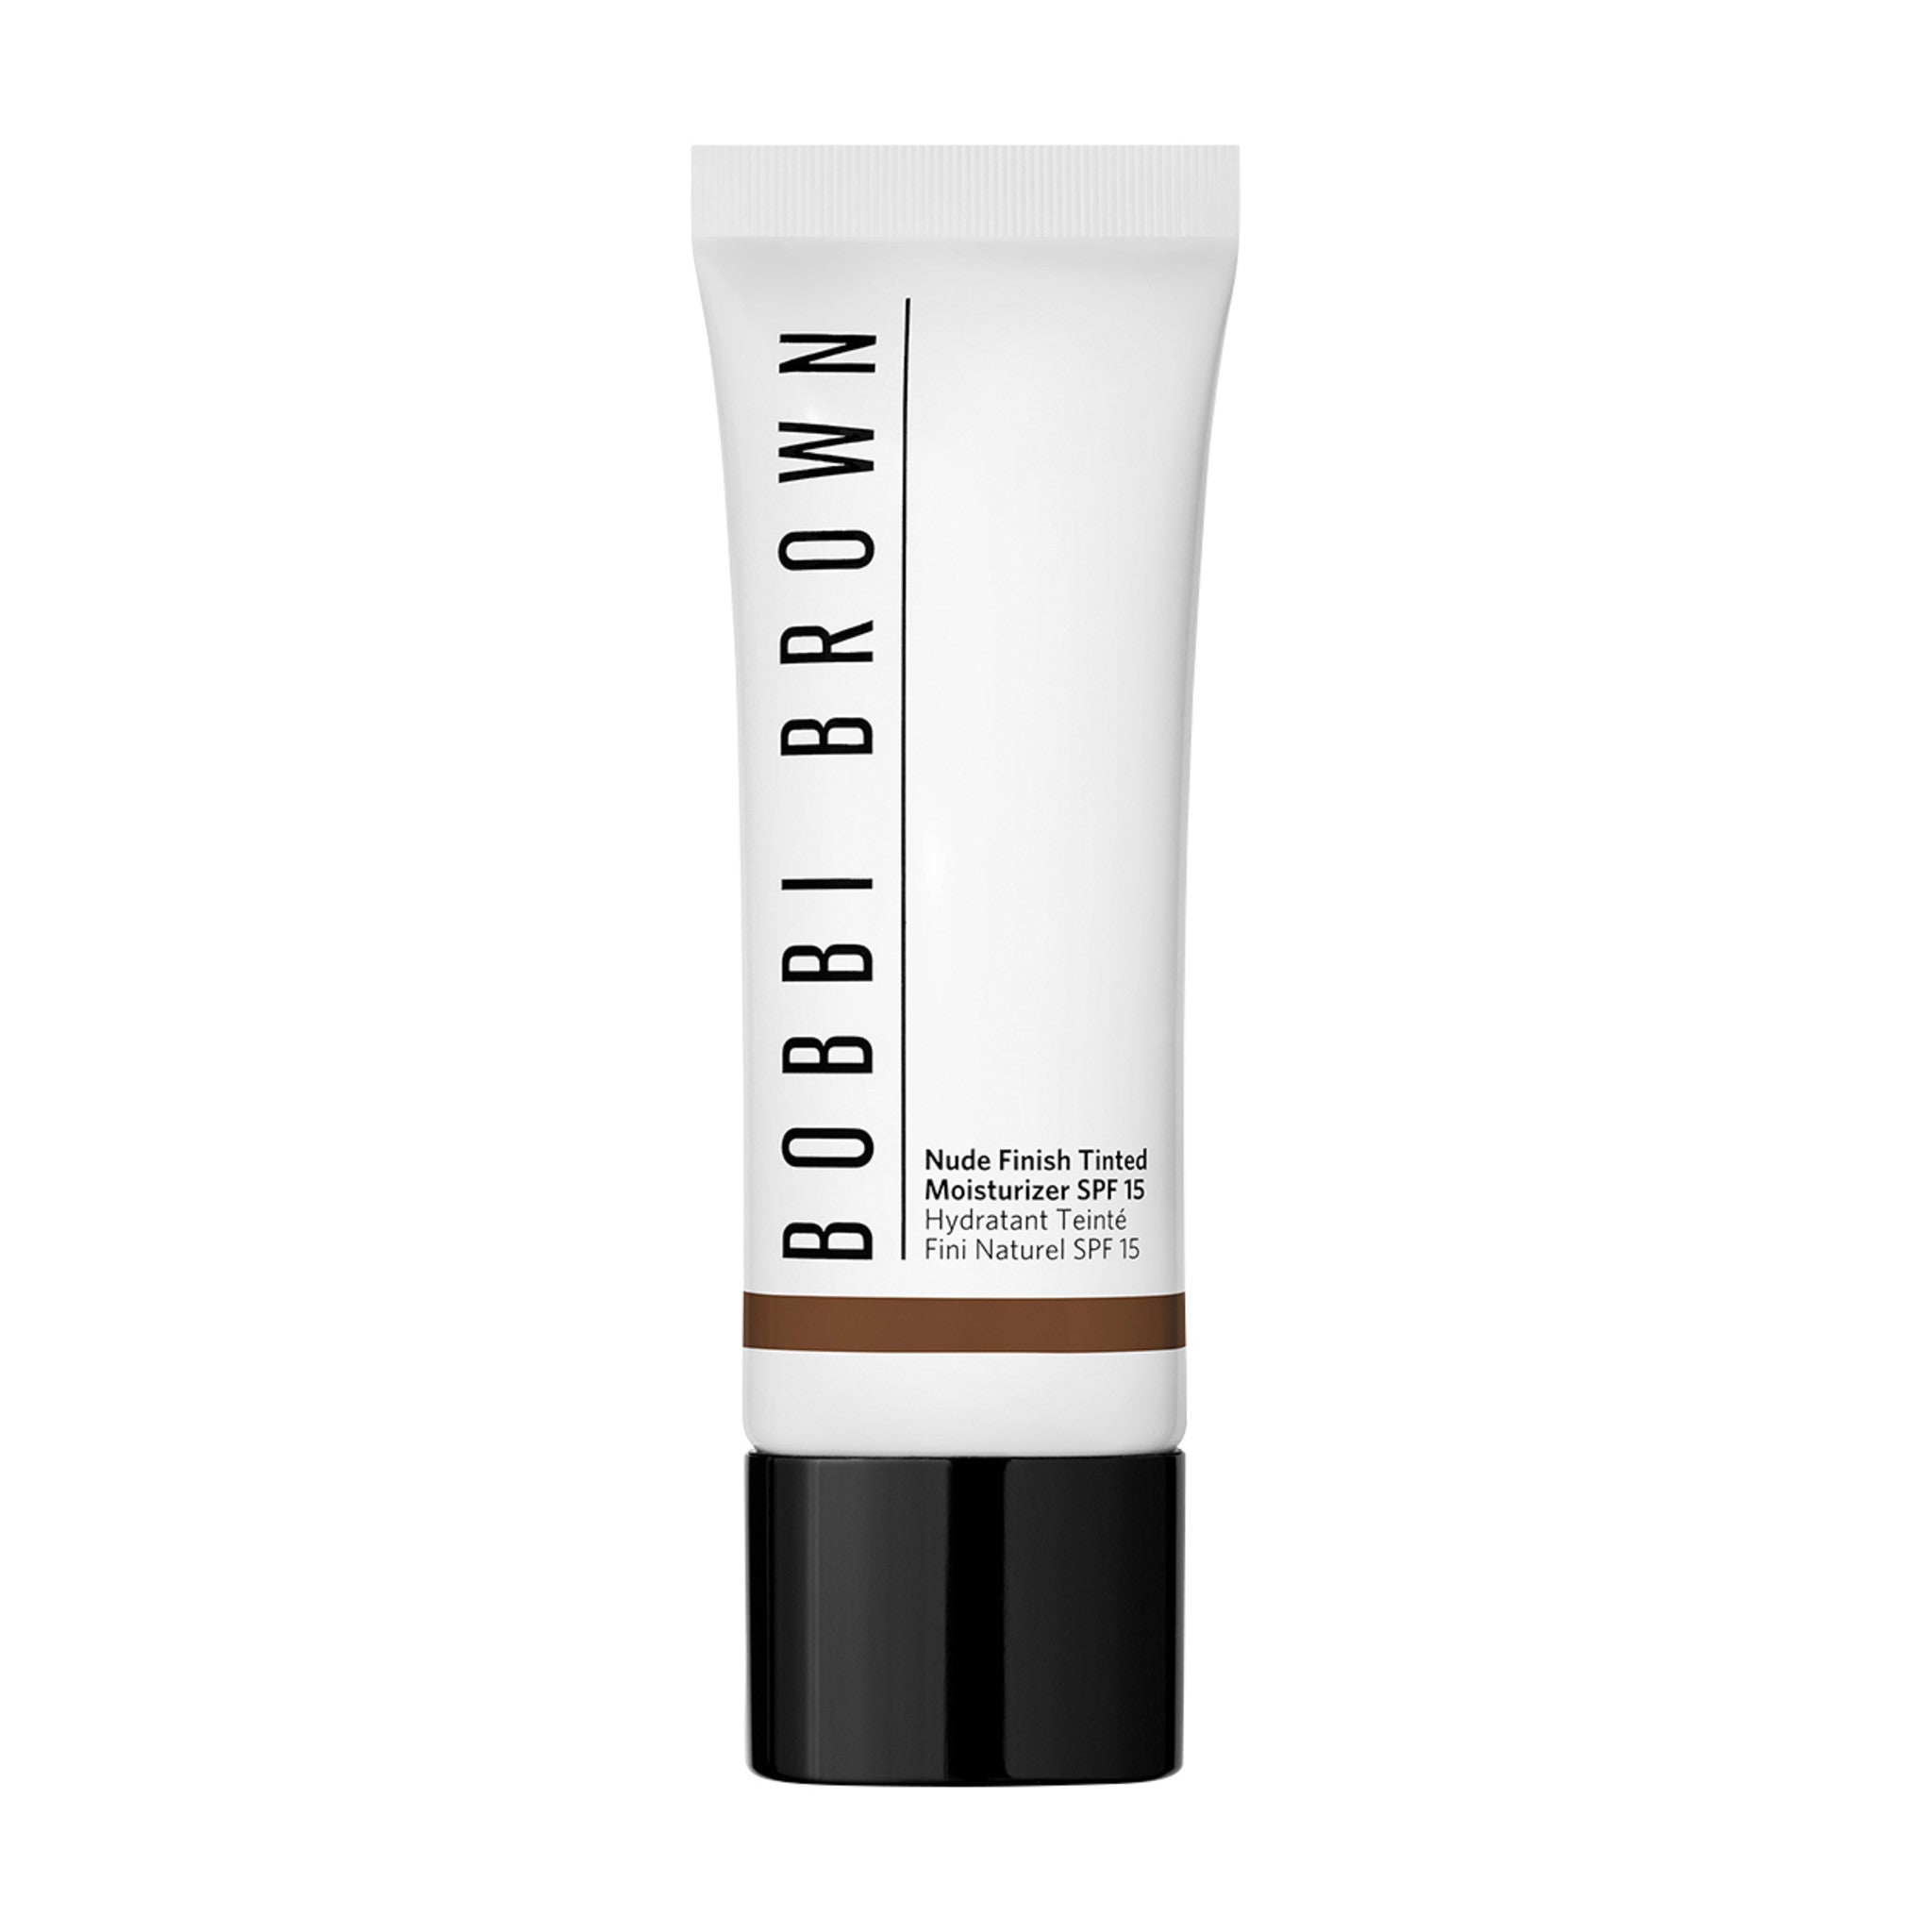 Bobbi Brown Nude Finish Tinted Moisturizer SPF 15 Color/Shade variant: Rich main image. This product is for deep neutral peach complexions